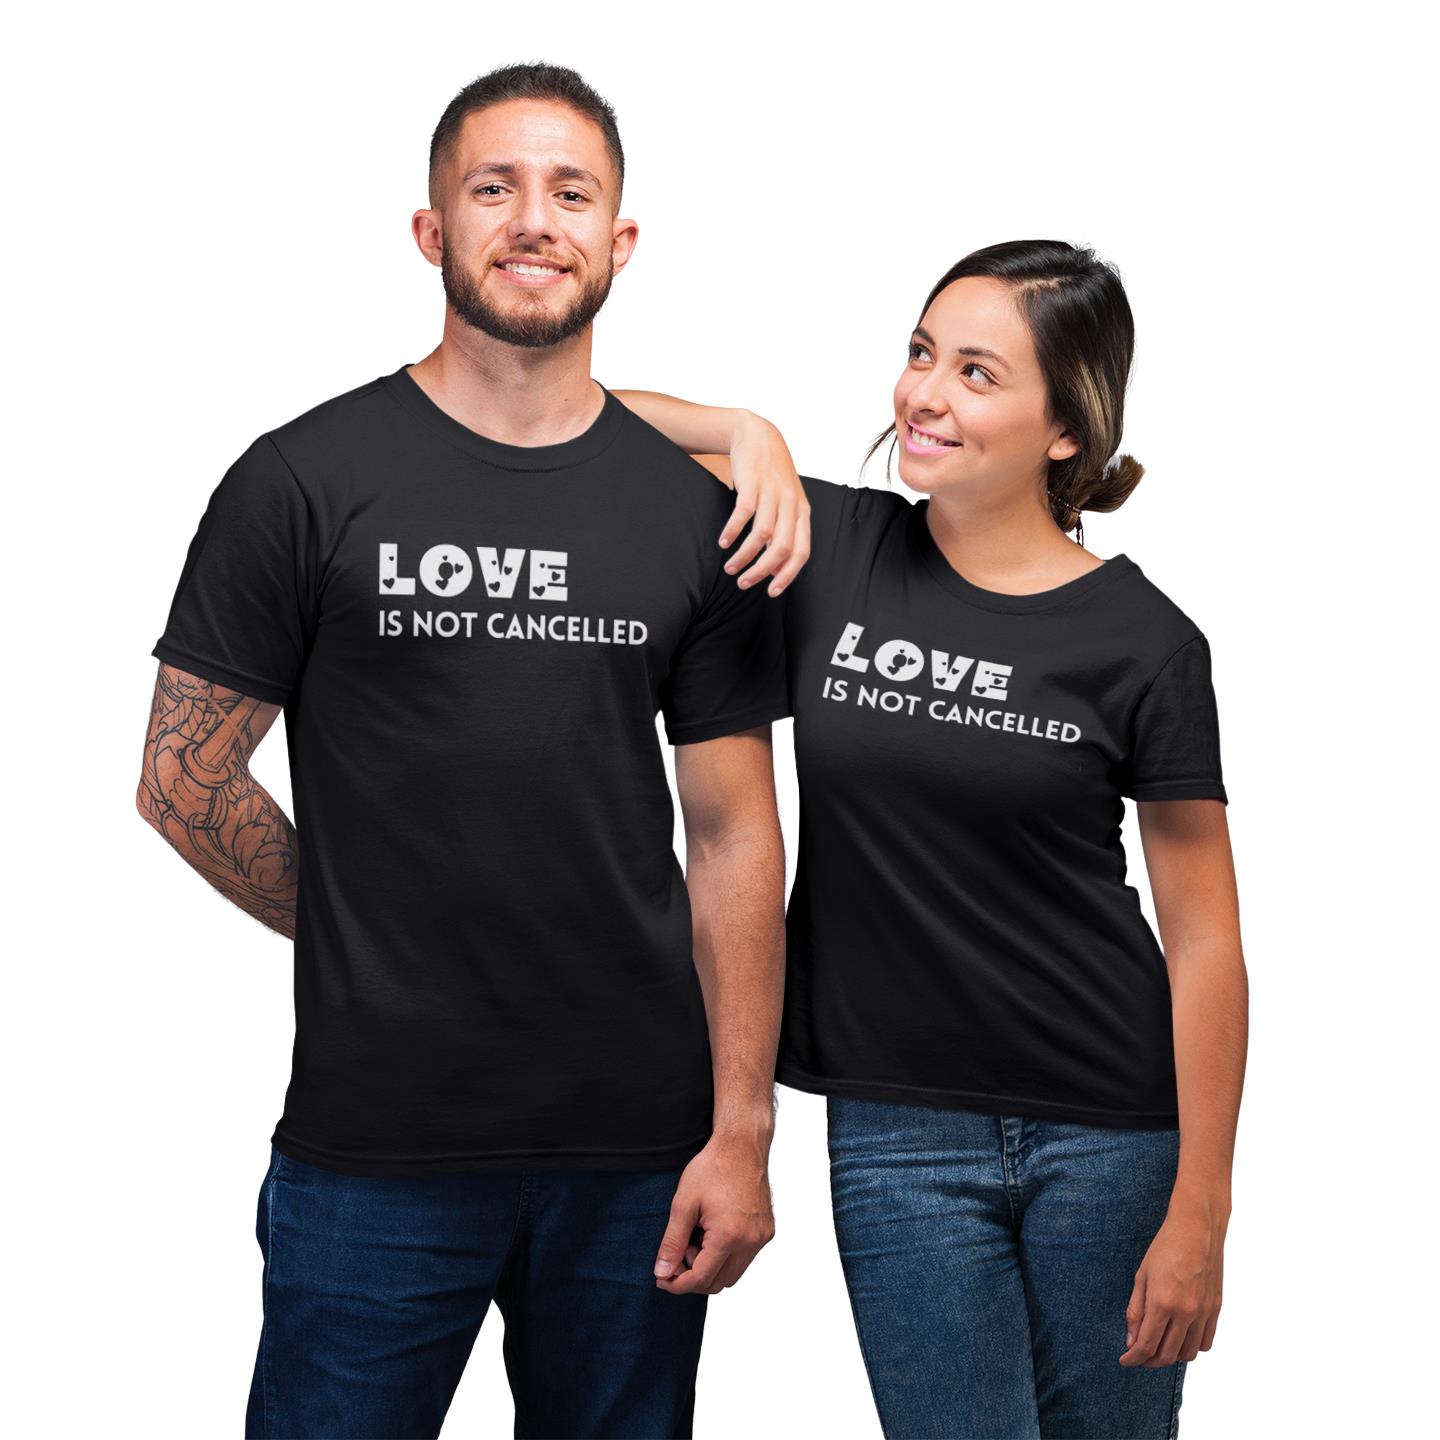 Love Is Not Cancelled Shirt For Couple Matching His And Hers T-shirt